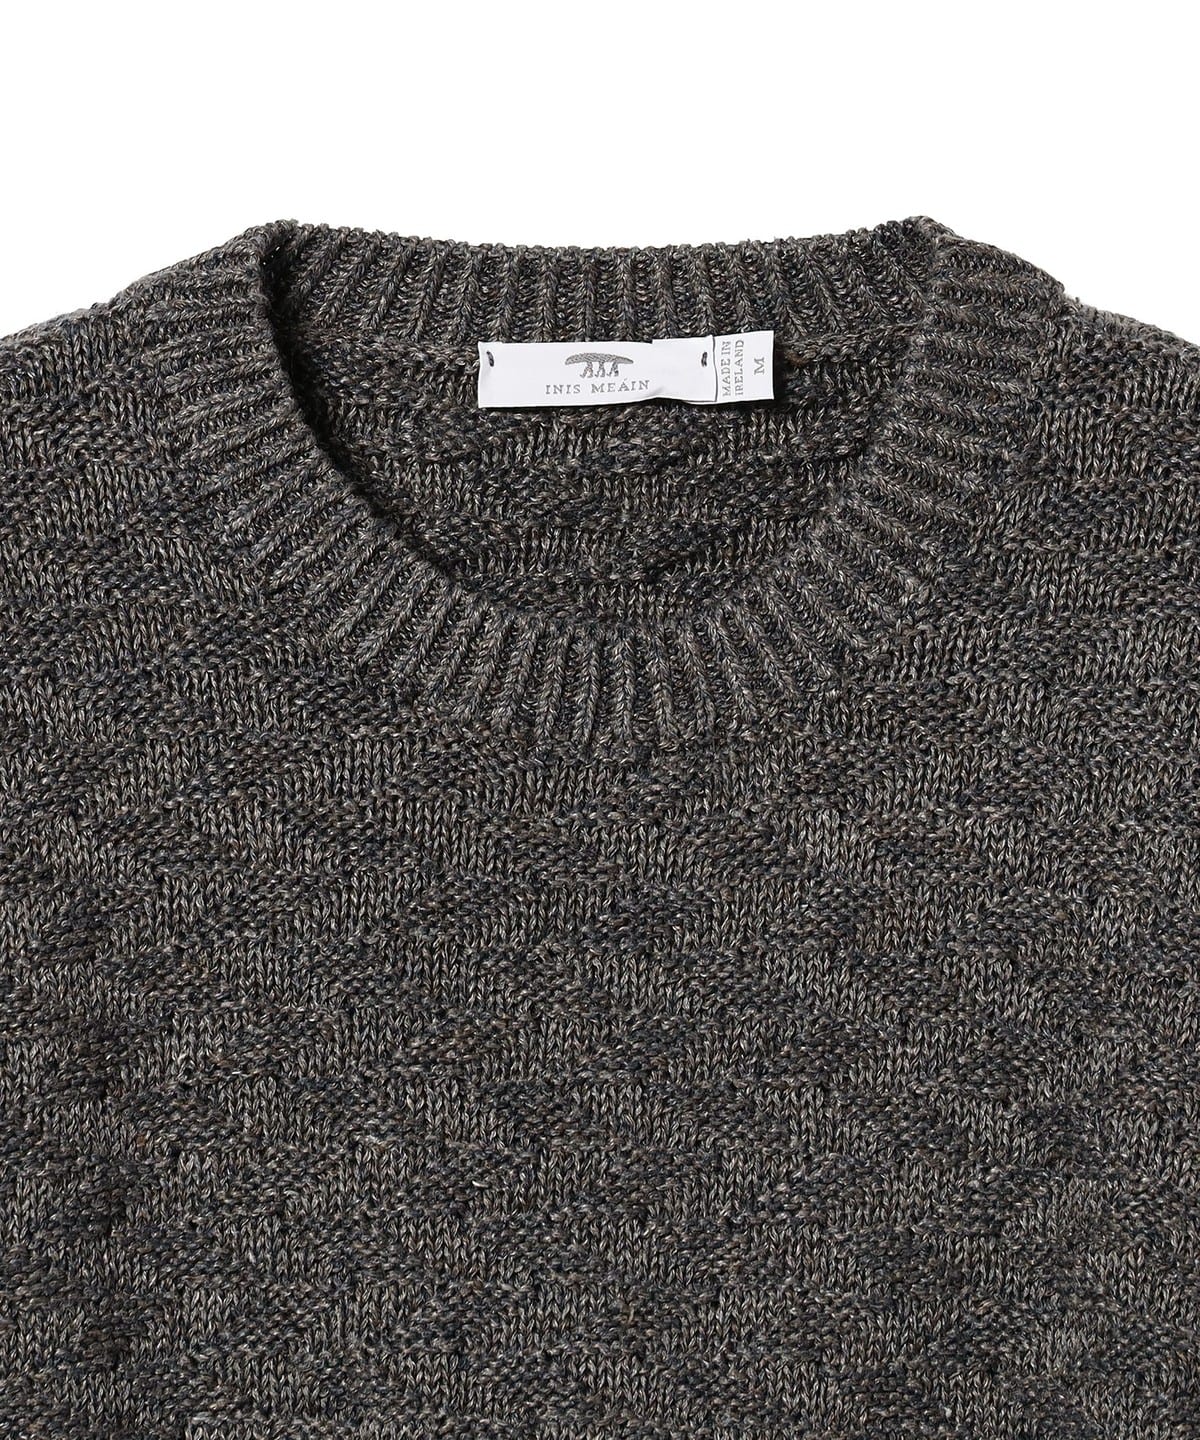 BEAMS PLUS（ビームス プラス）INIS MEAIN / Crew Neck Knit（トップス 